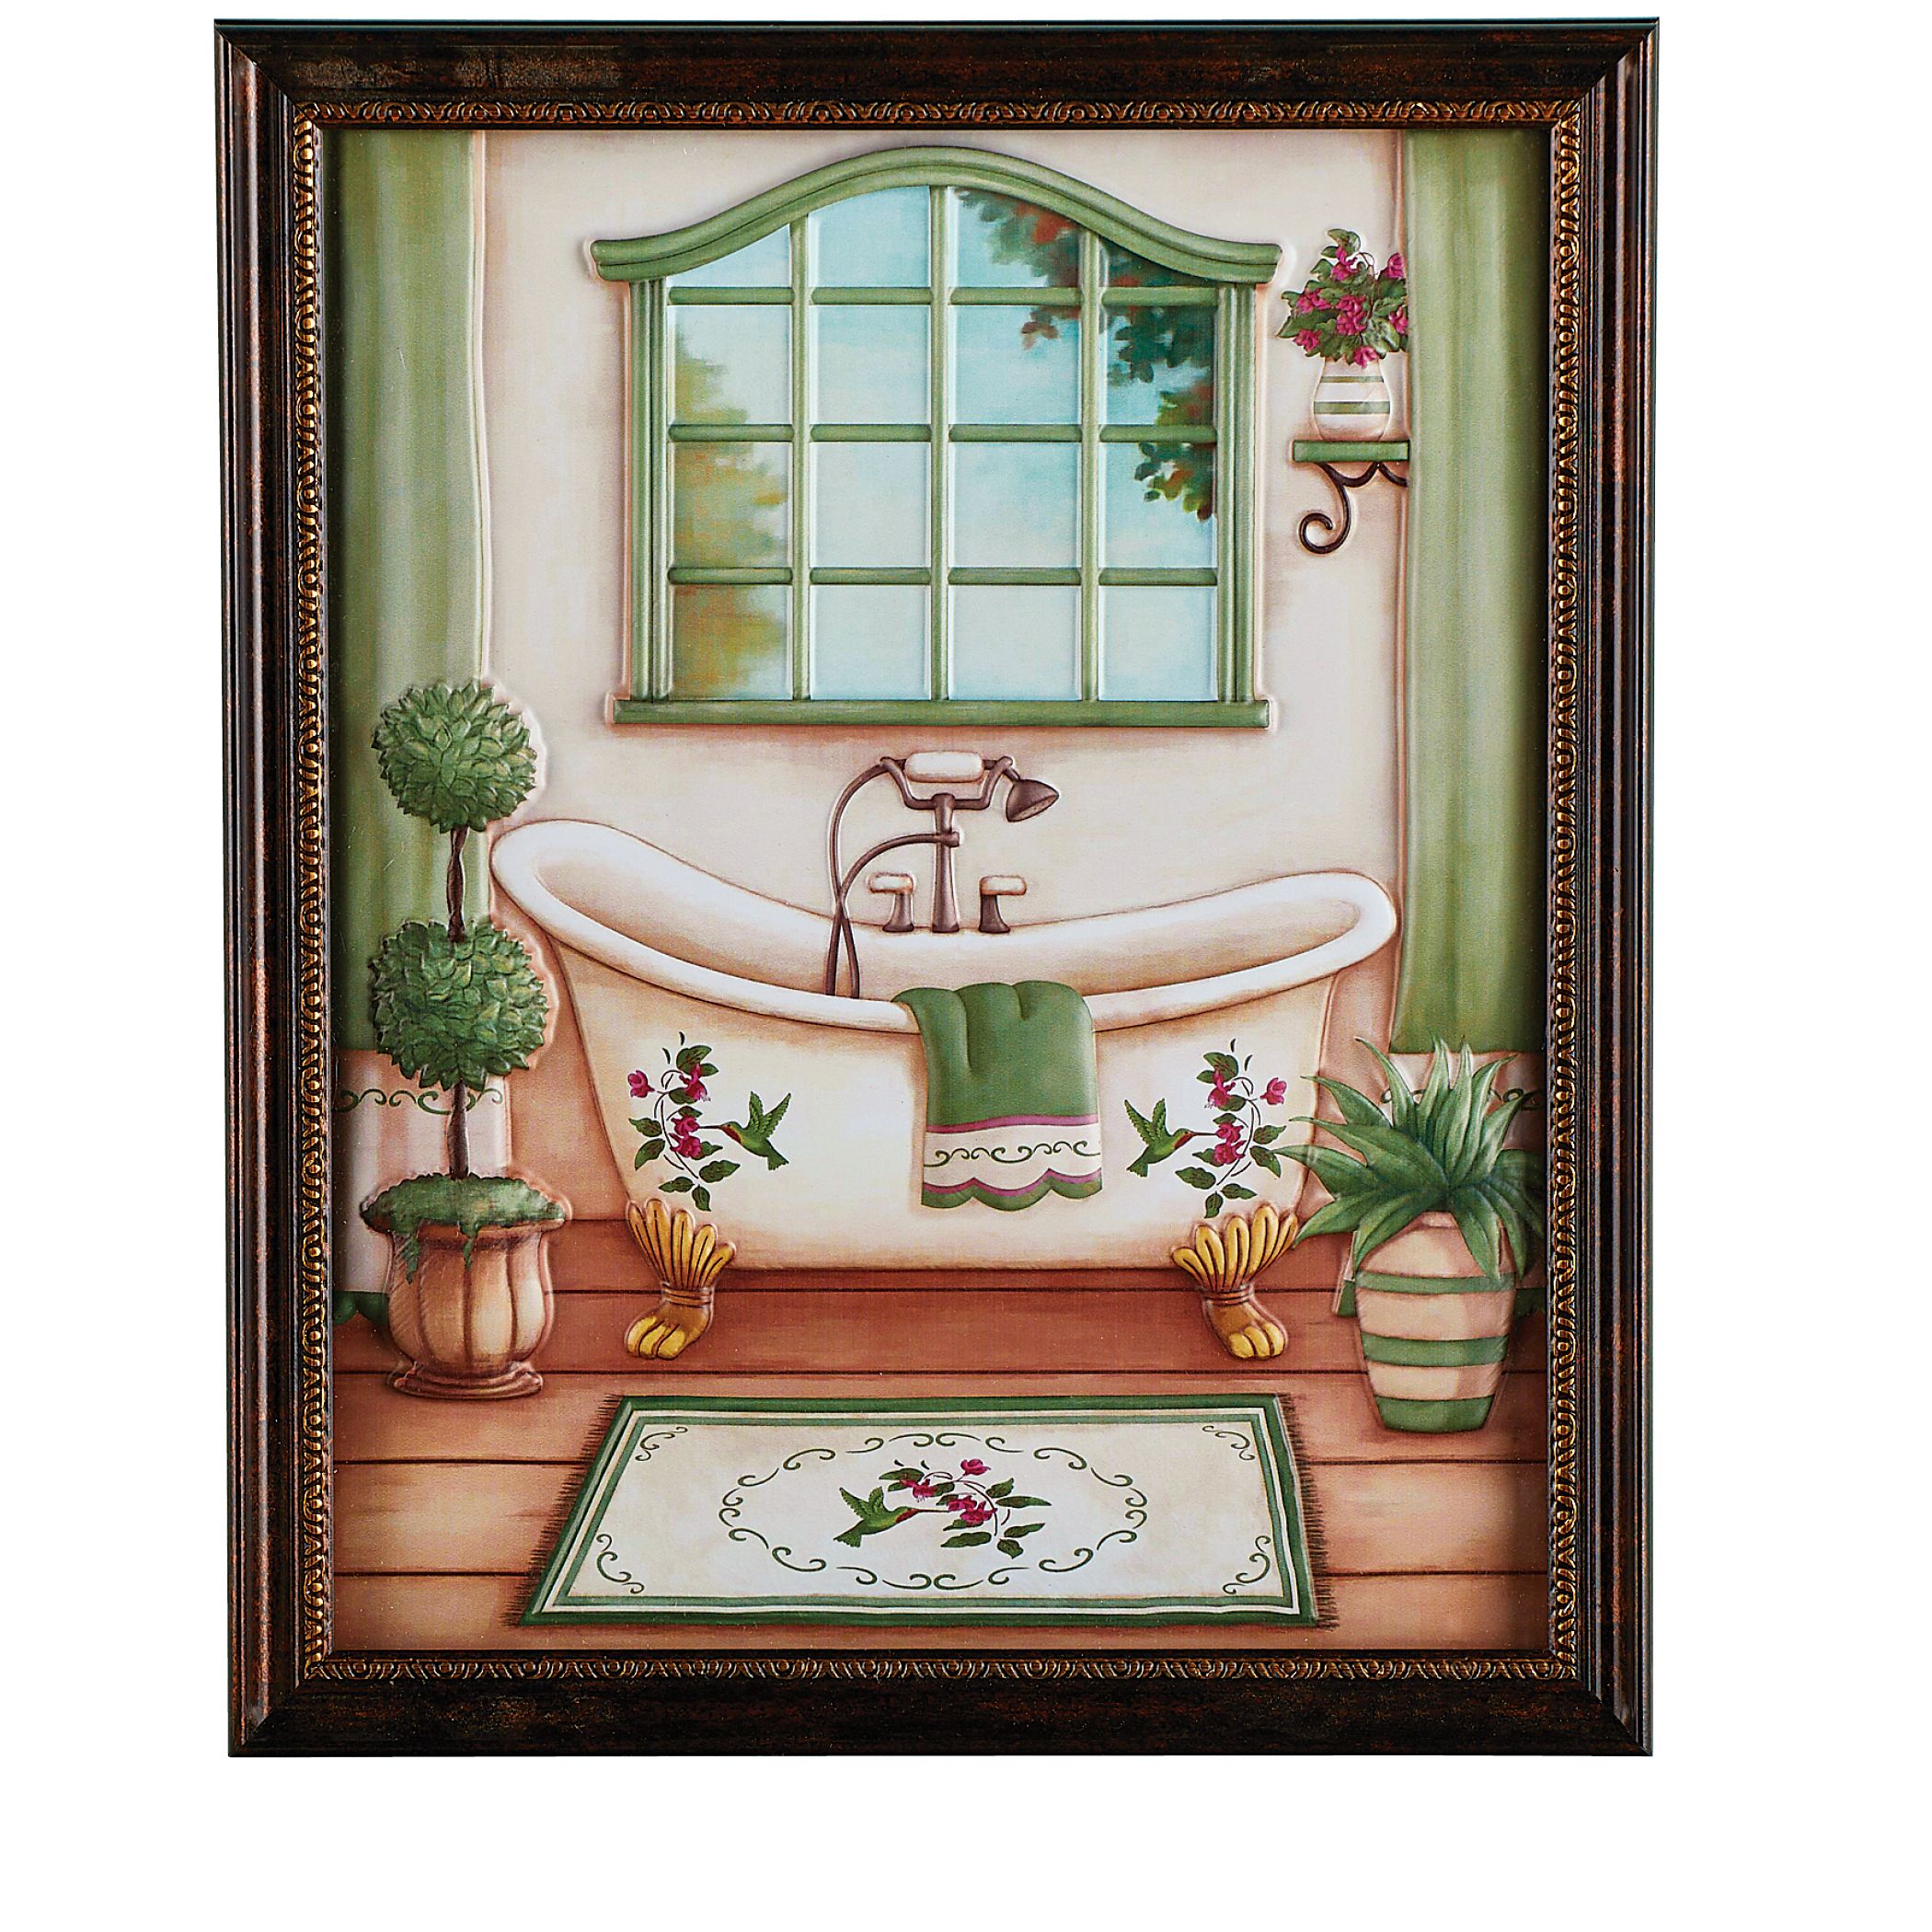 Charming & Cool Vintage Bathroom Framed Wall Art Picture Within 2018 Sunshine Framed Art Prints (View 5 of 20)